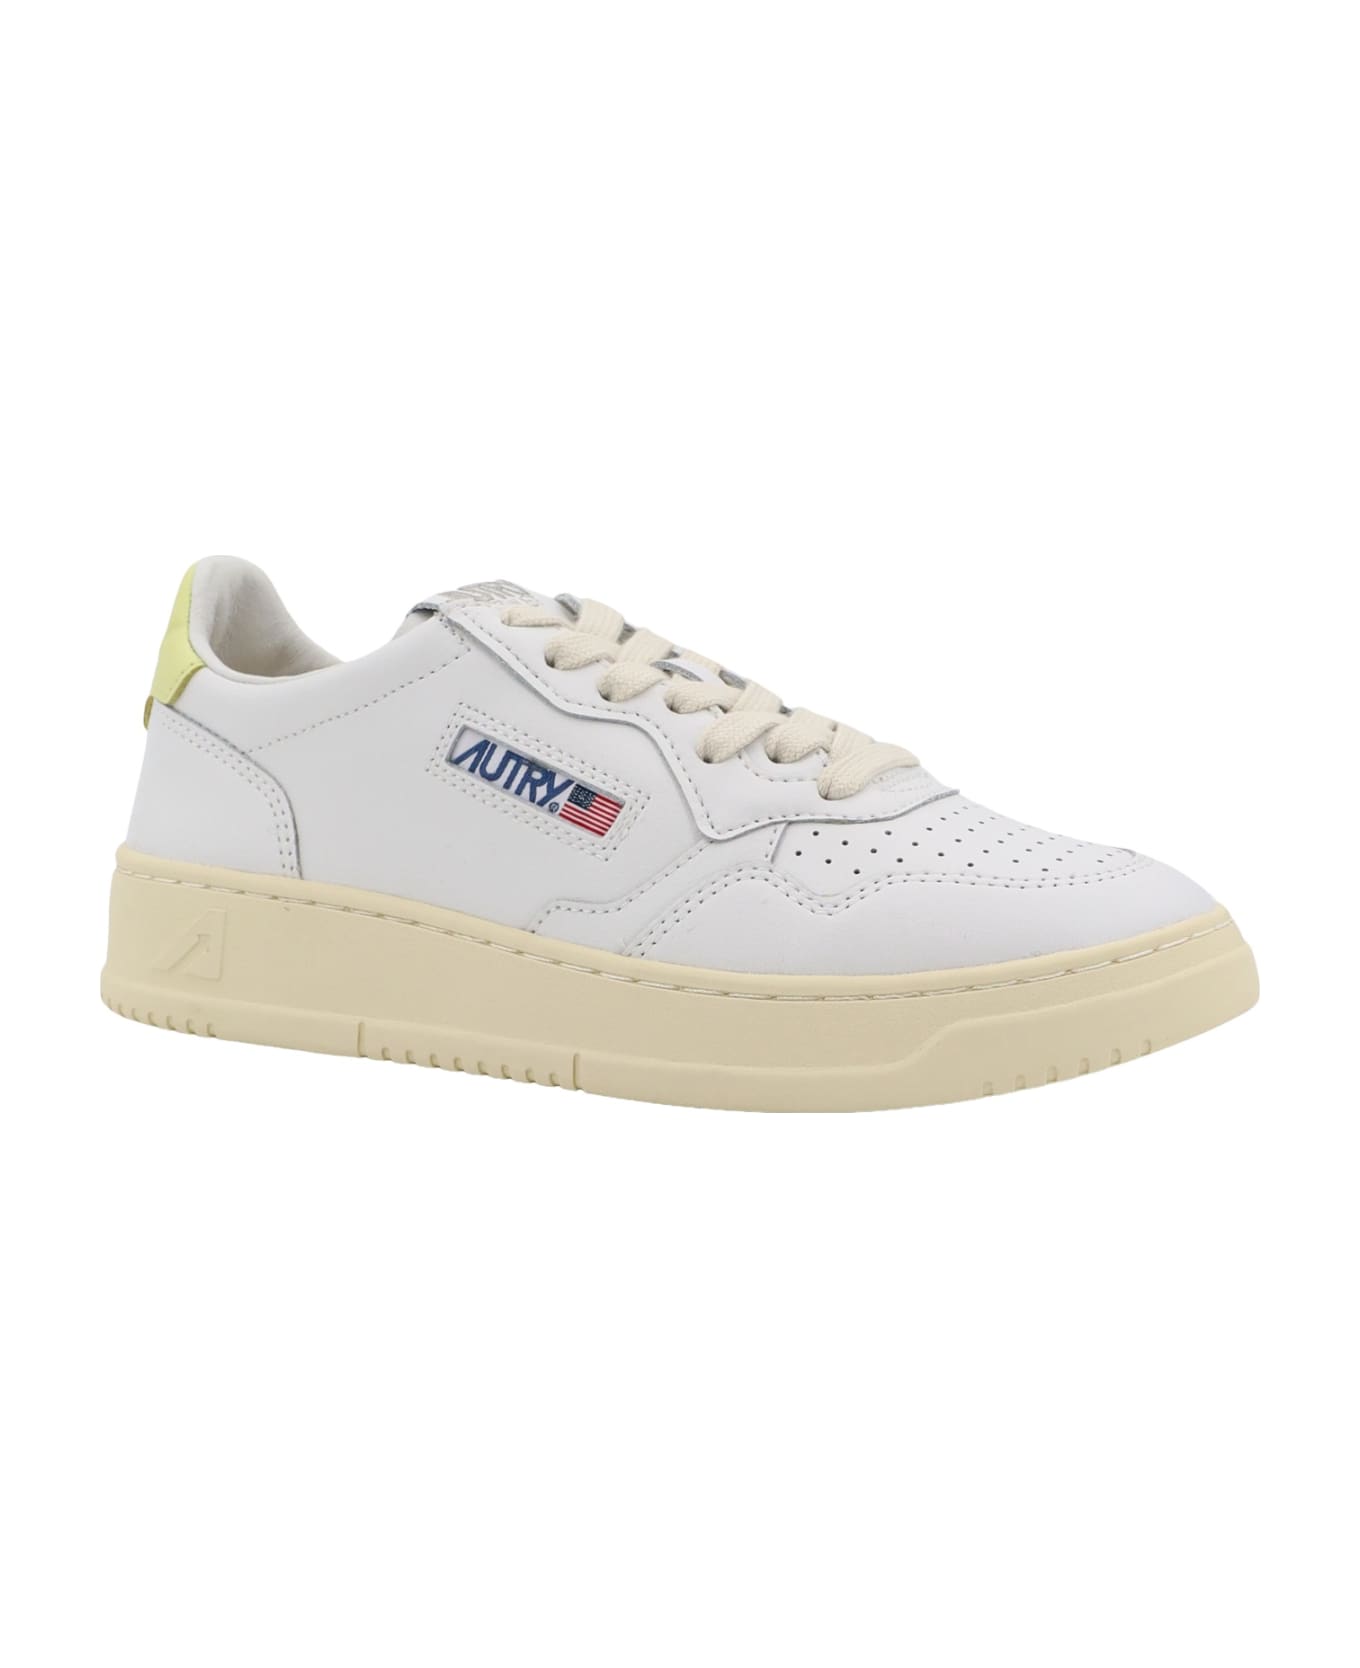 Autry Medalist Low Sneaker - White